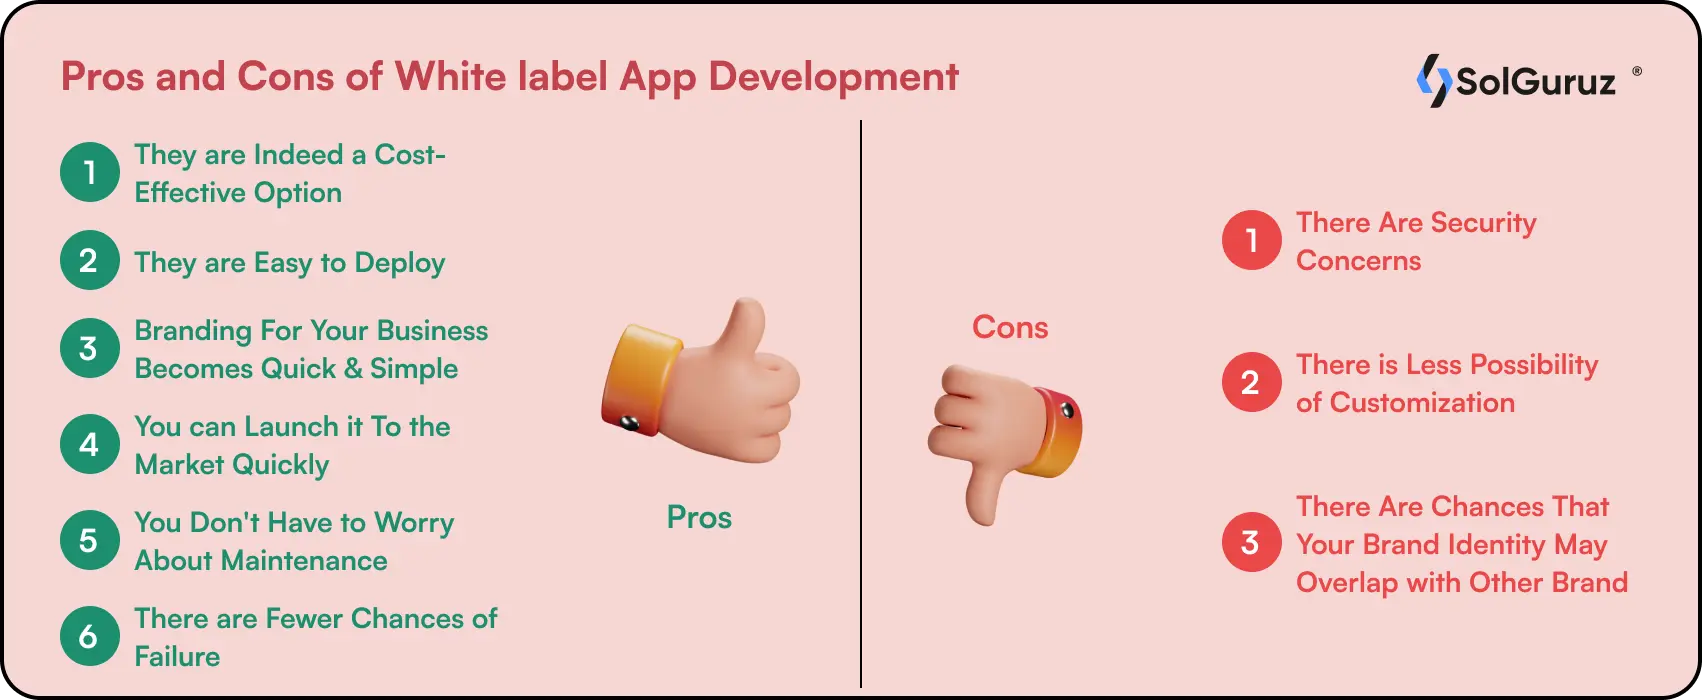 Pros and Cons of White label app development